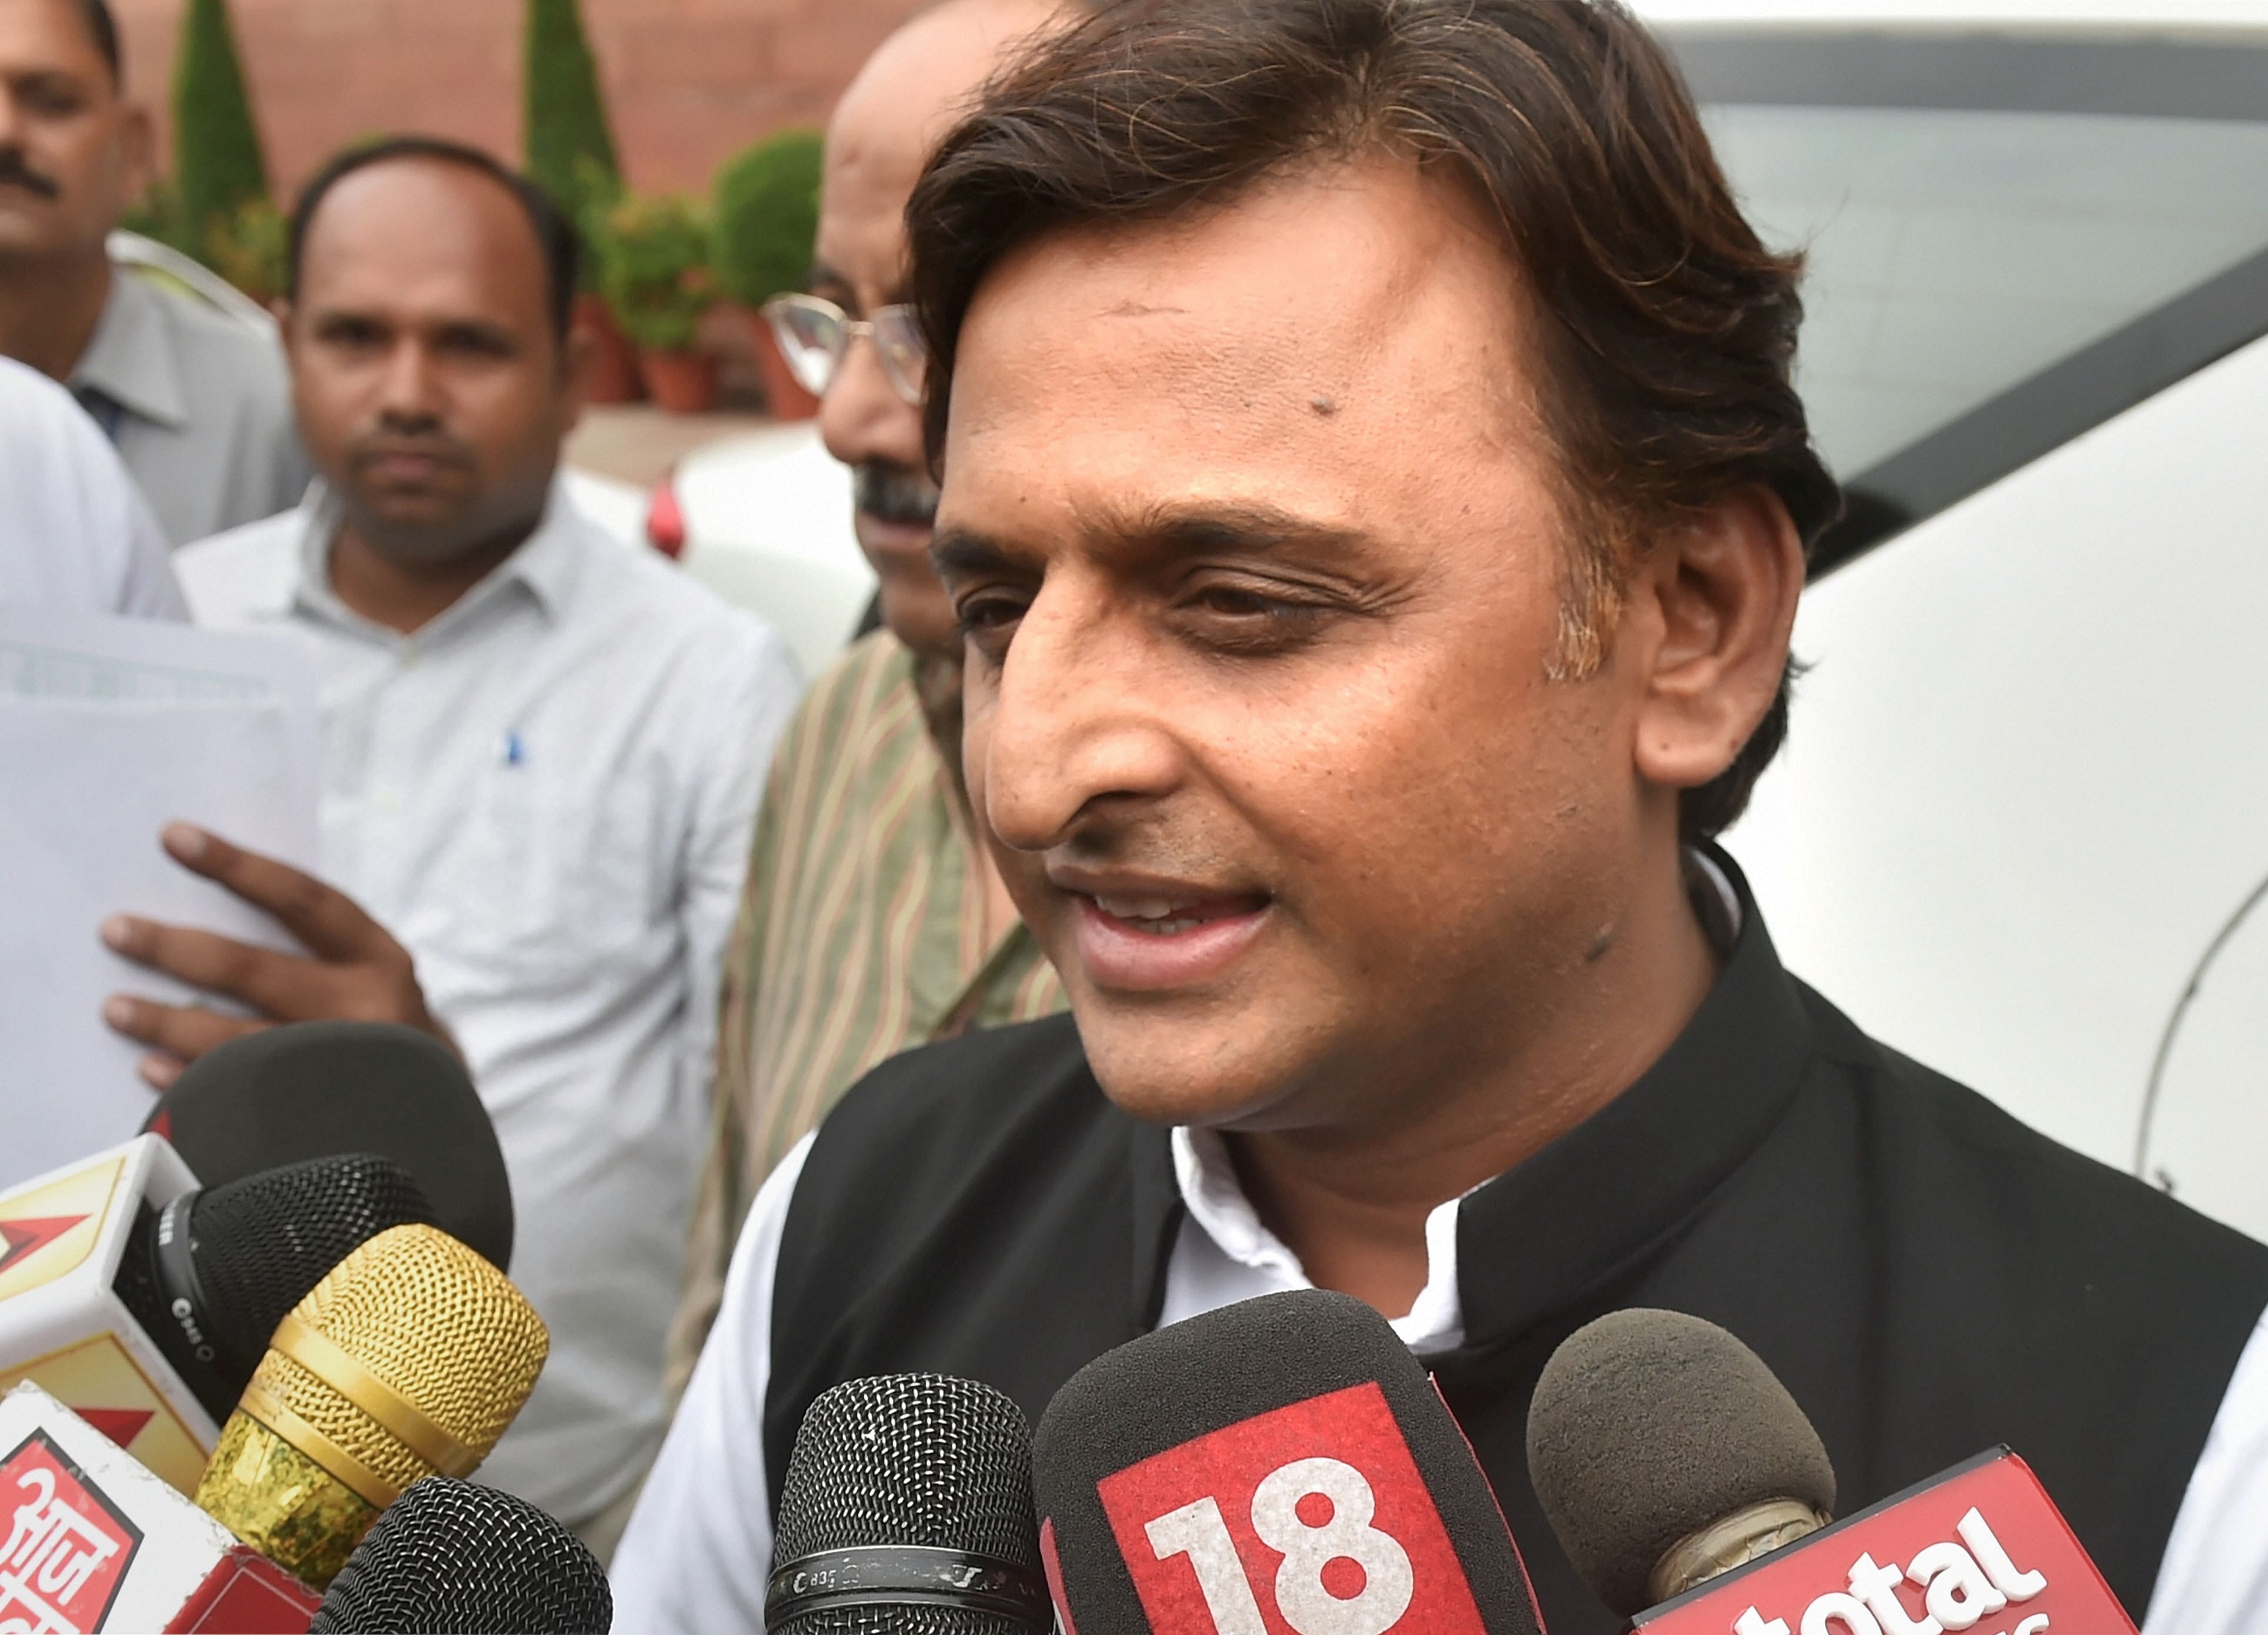 SP chief Akhilesh Yadav alleged that it could be a conspiracy to kill her and demanded a CBI probe into the Sunday incident. (PTI Photo)